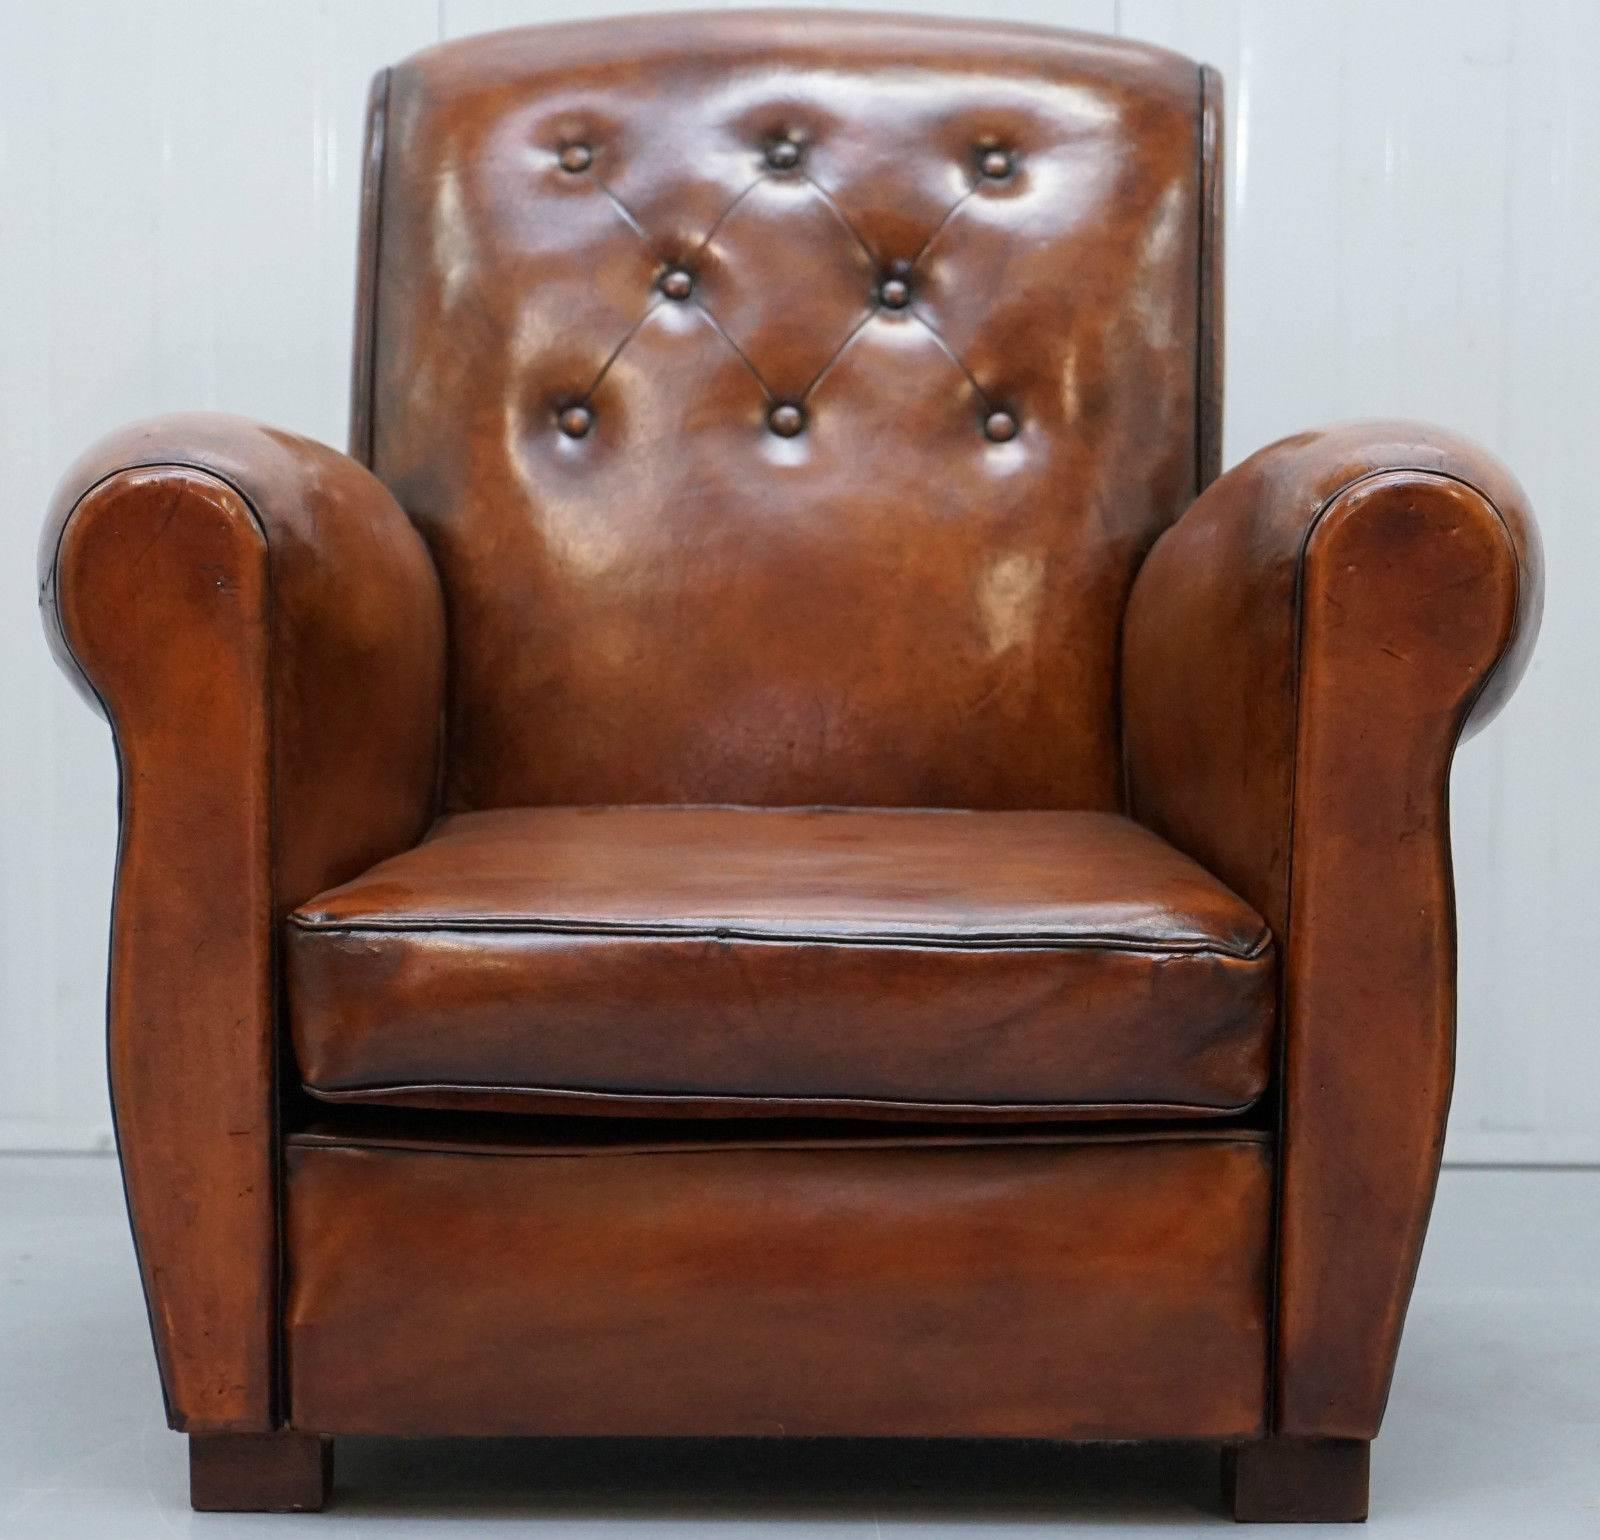 We are delighted to offer for sale this lovely pair of fully restored original Antique French, circa 1920-1930 hand made coil sprung base club armchairs

These are pretty much the best of the best, they have every single desirable quality when it